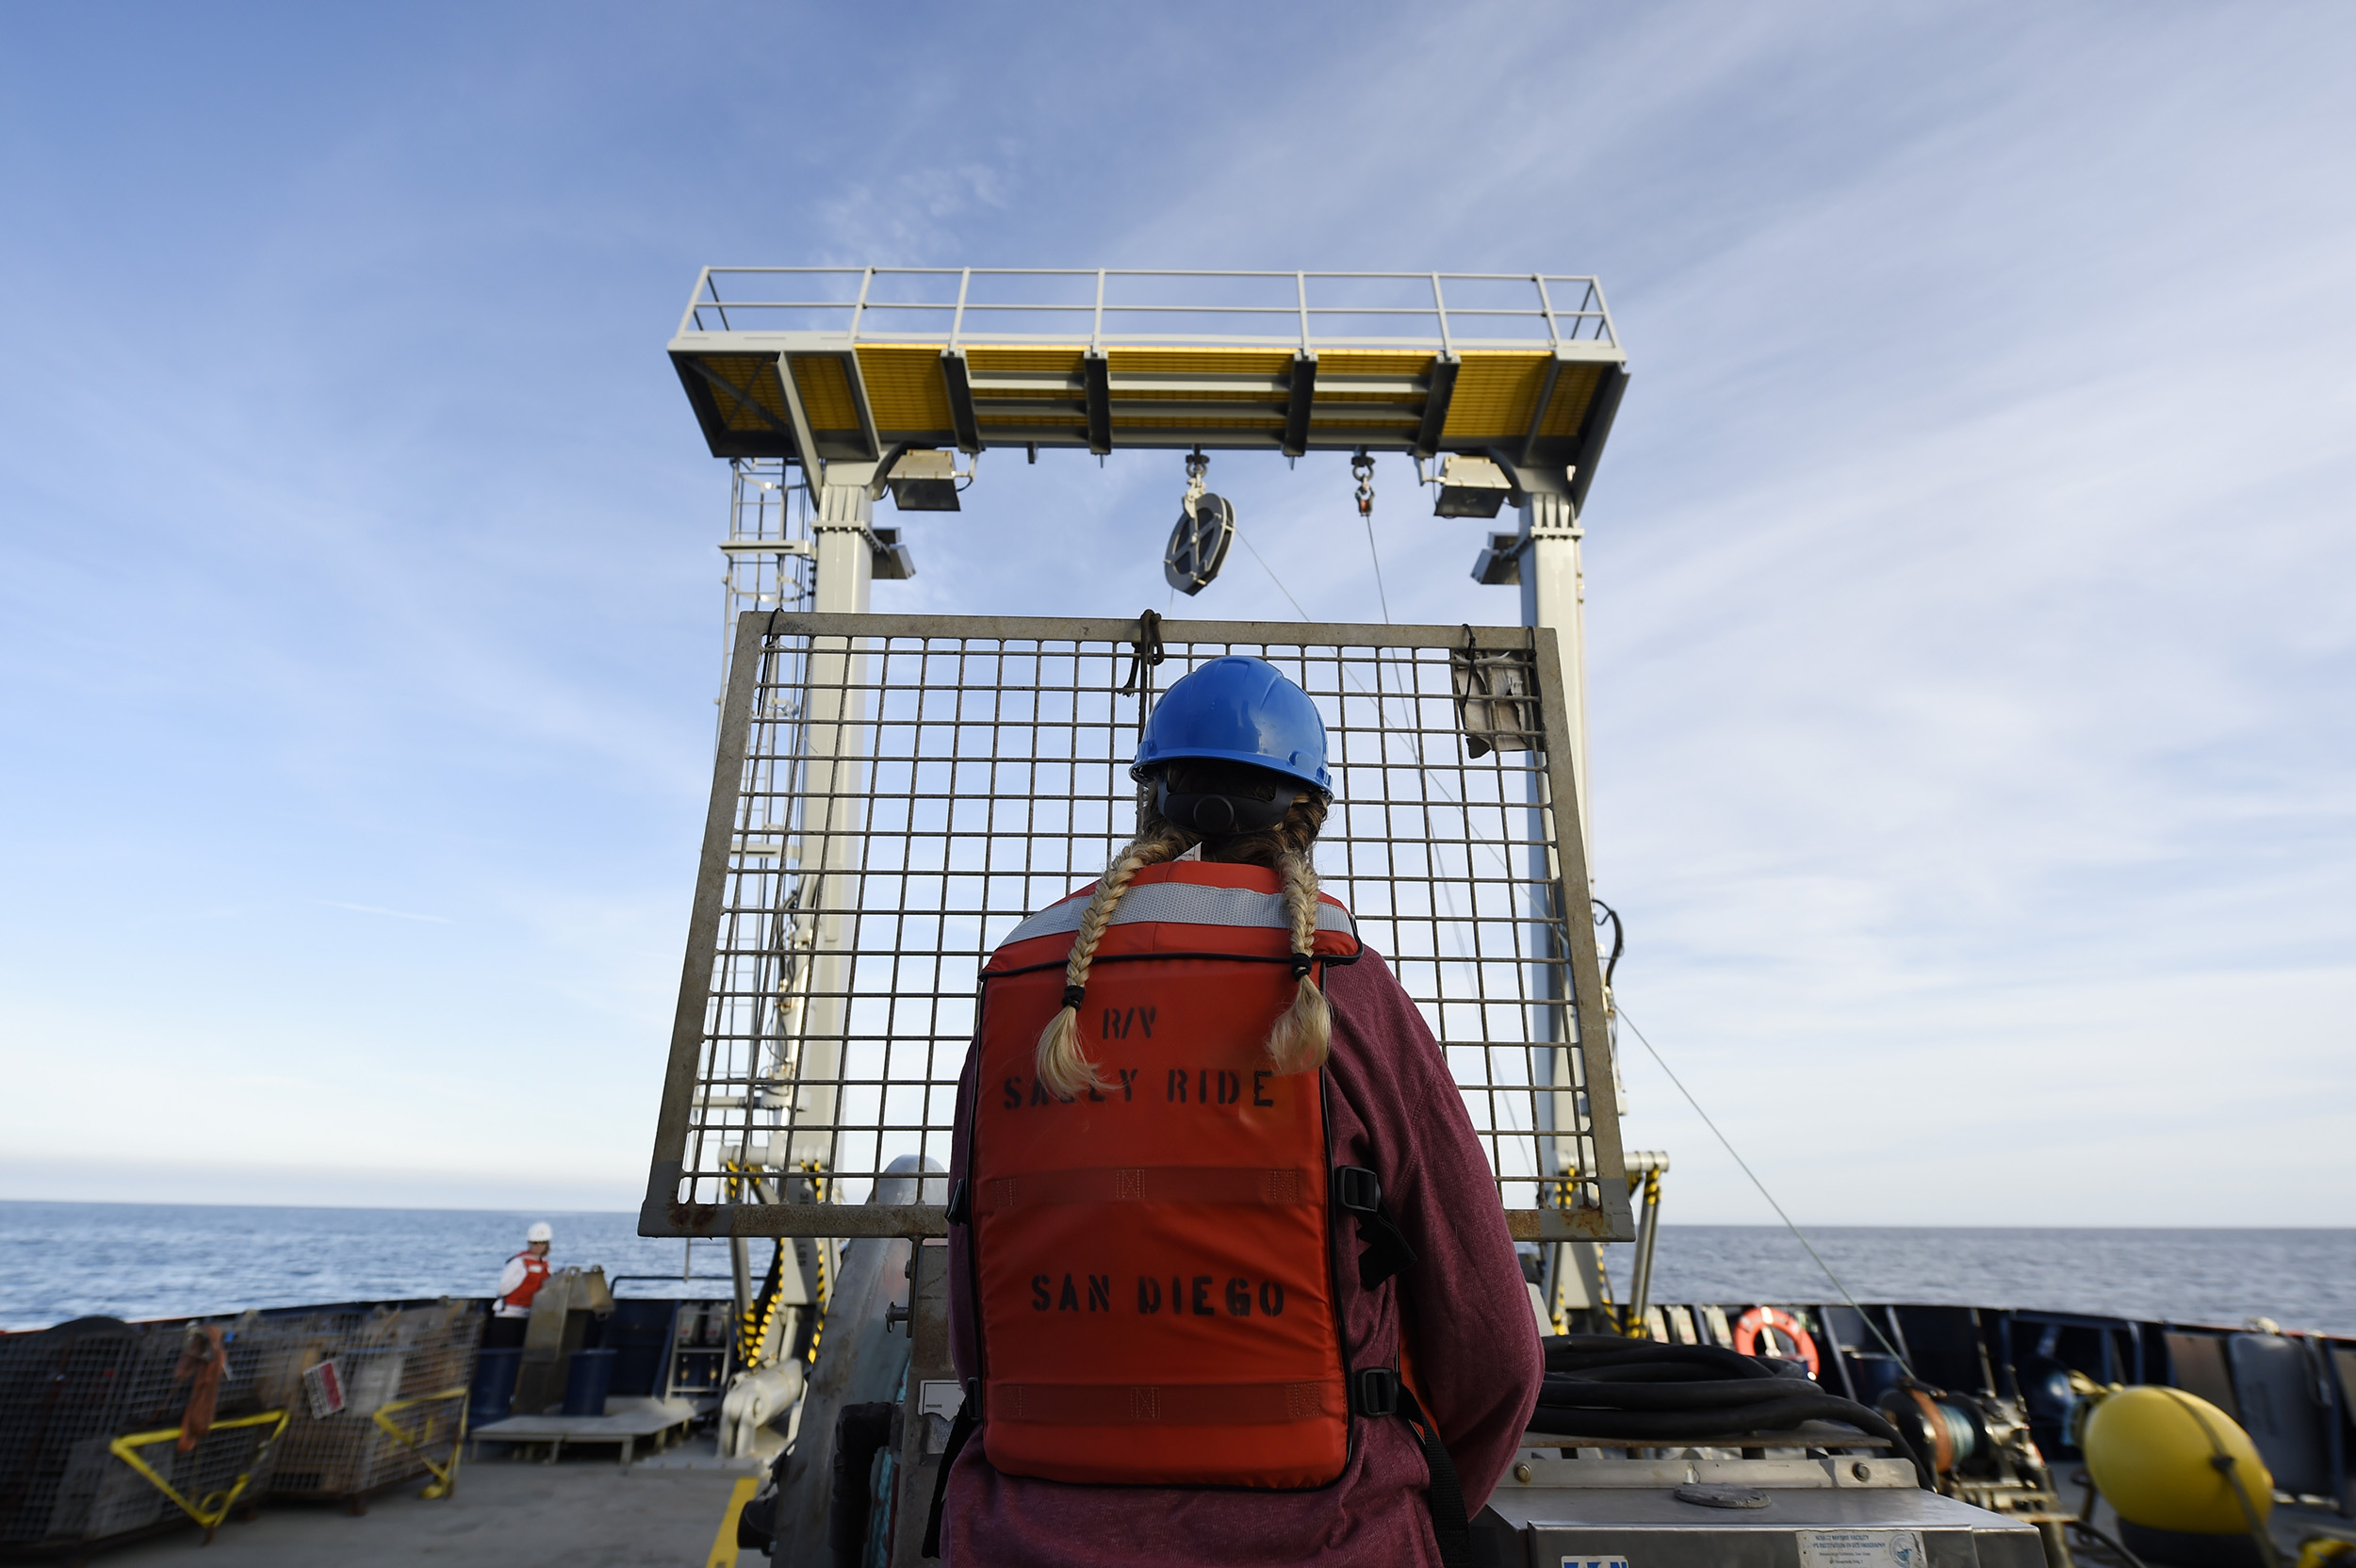  PACIFIC OCEAN - Sara Goheen, an engineer with Scripps Institution of Oceanography, operates a crane aboard the Auxiliary General Oceanographic Research (AGOR) vessel R/V Sally Ride during the retrieval of scientific equipment as part of a science ve